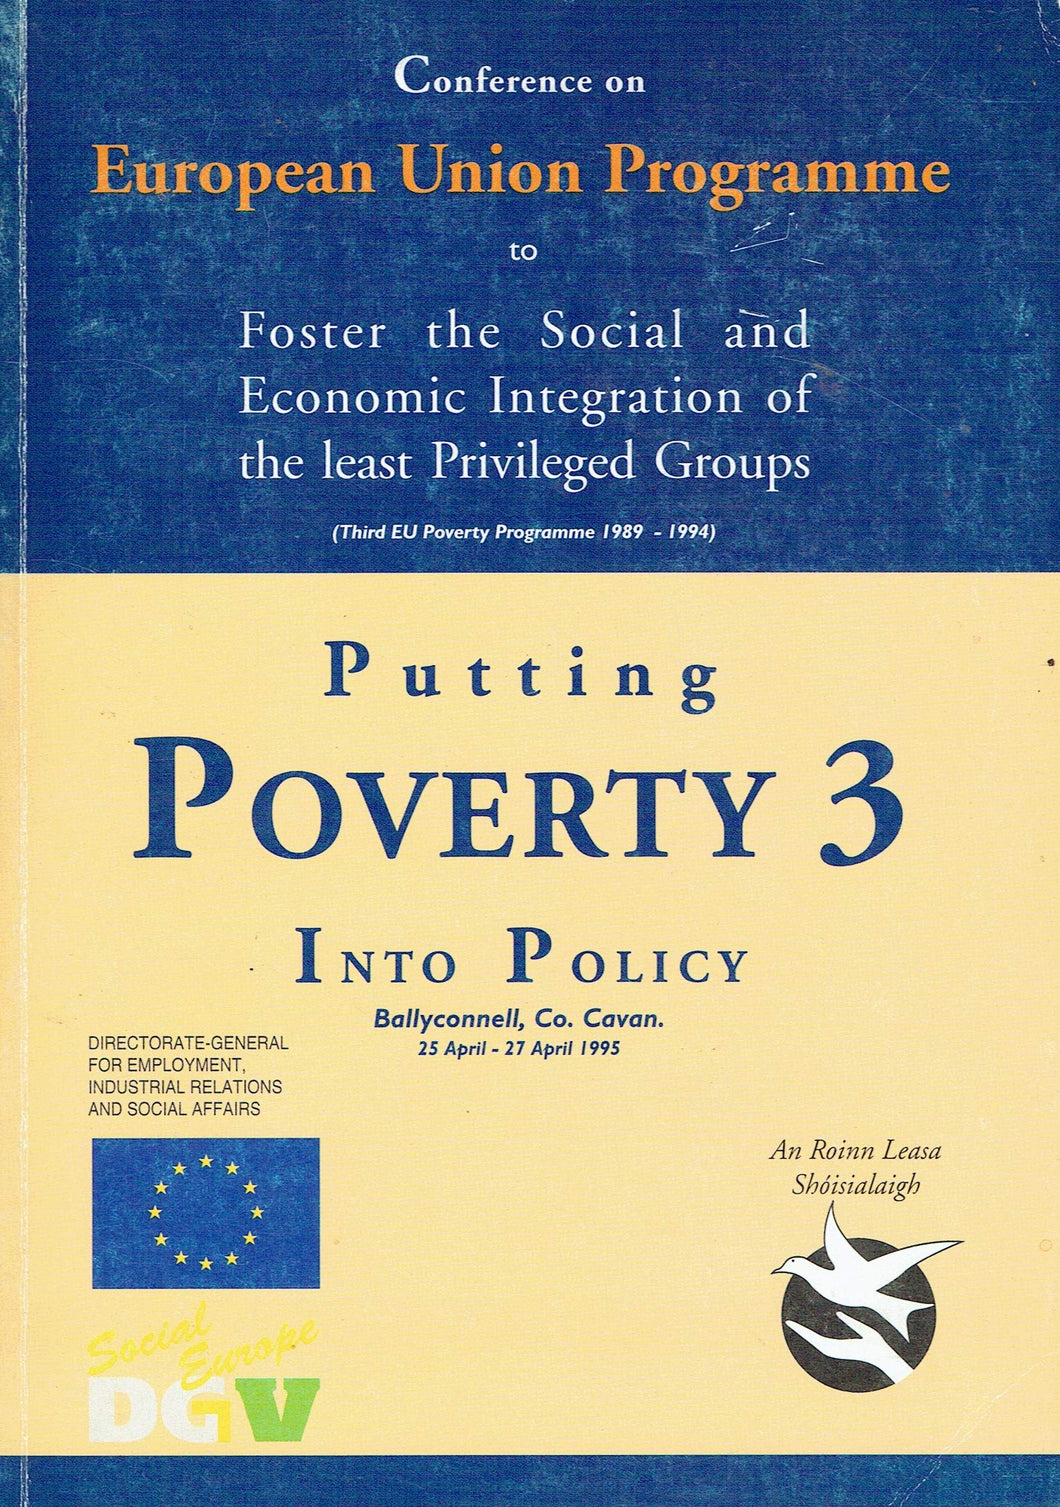 Putting Poverty 3 Into Policy: Conference on the European Union Porgramme to Foster the Social and Economic Integration of the Least Privileged Groups, Ballyconnell, Co Cavan, 25 April-27 April 1995